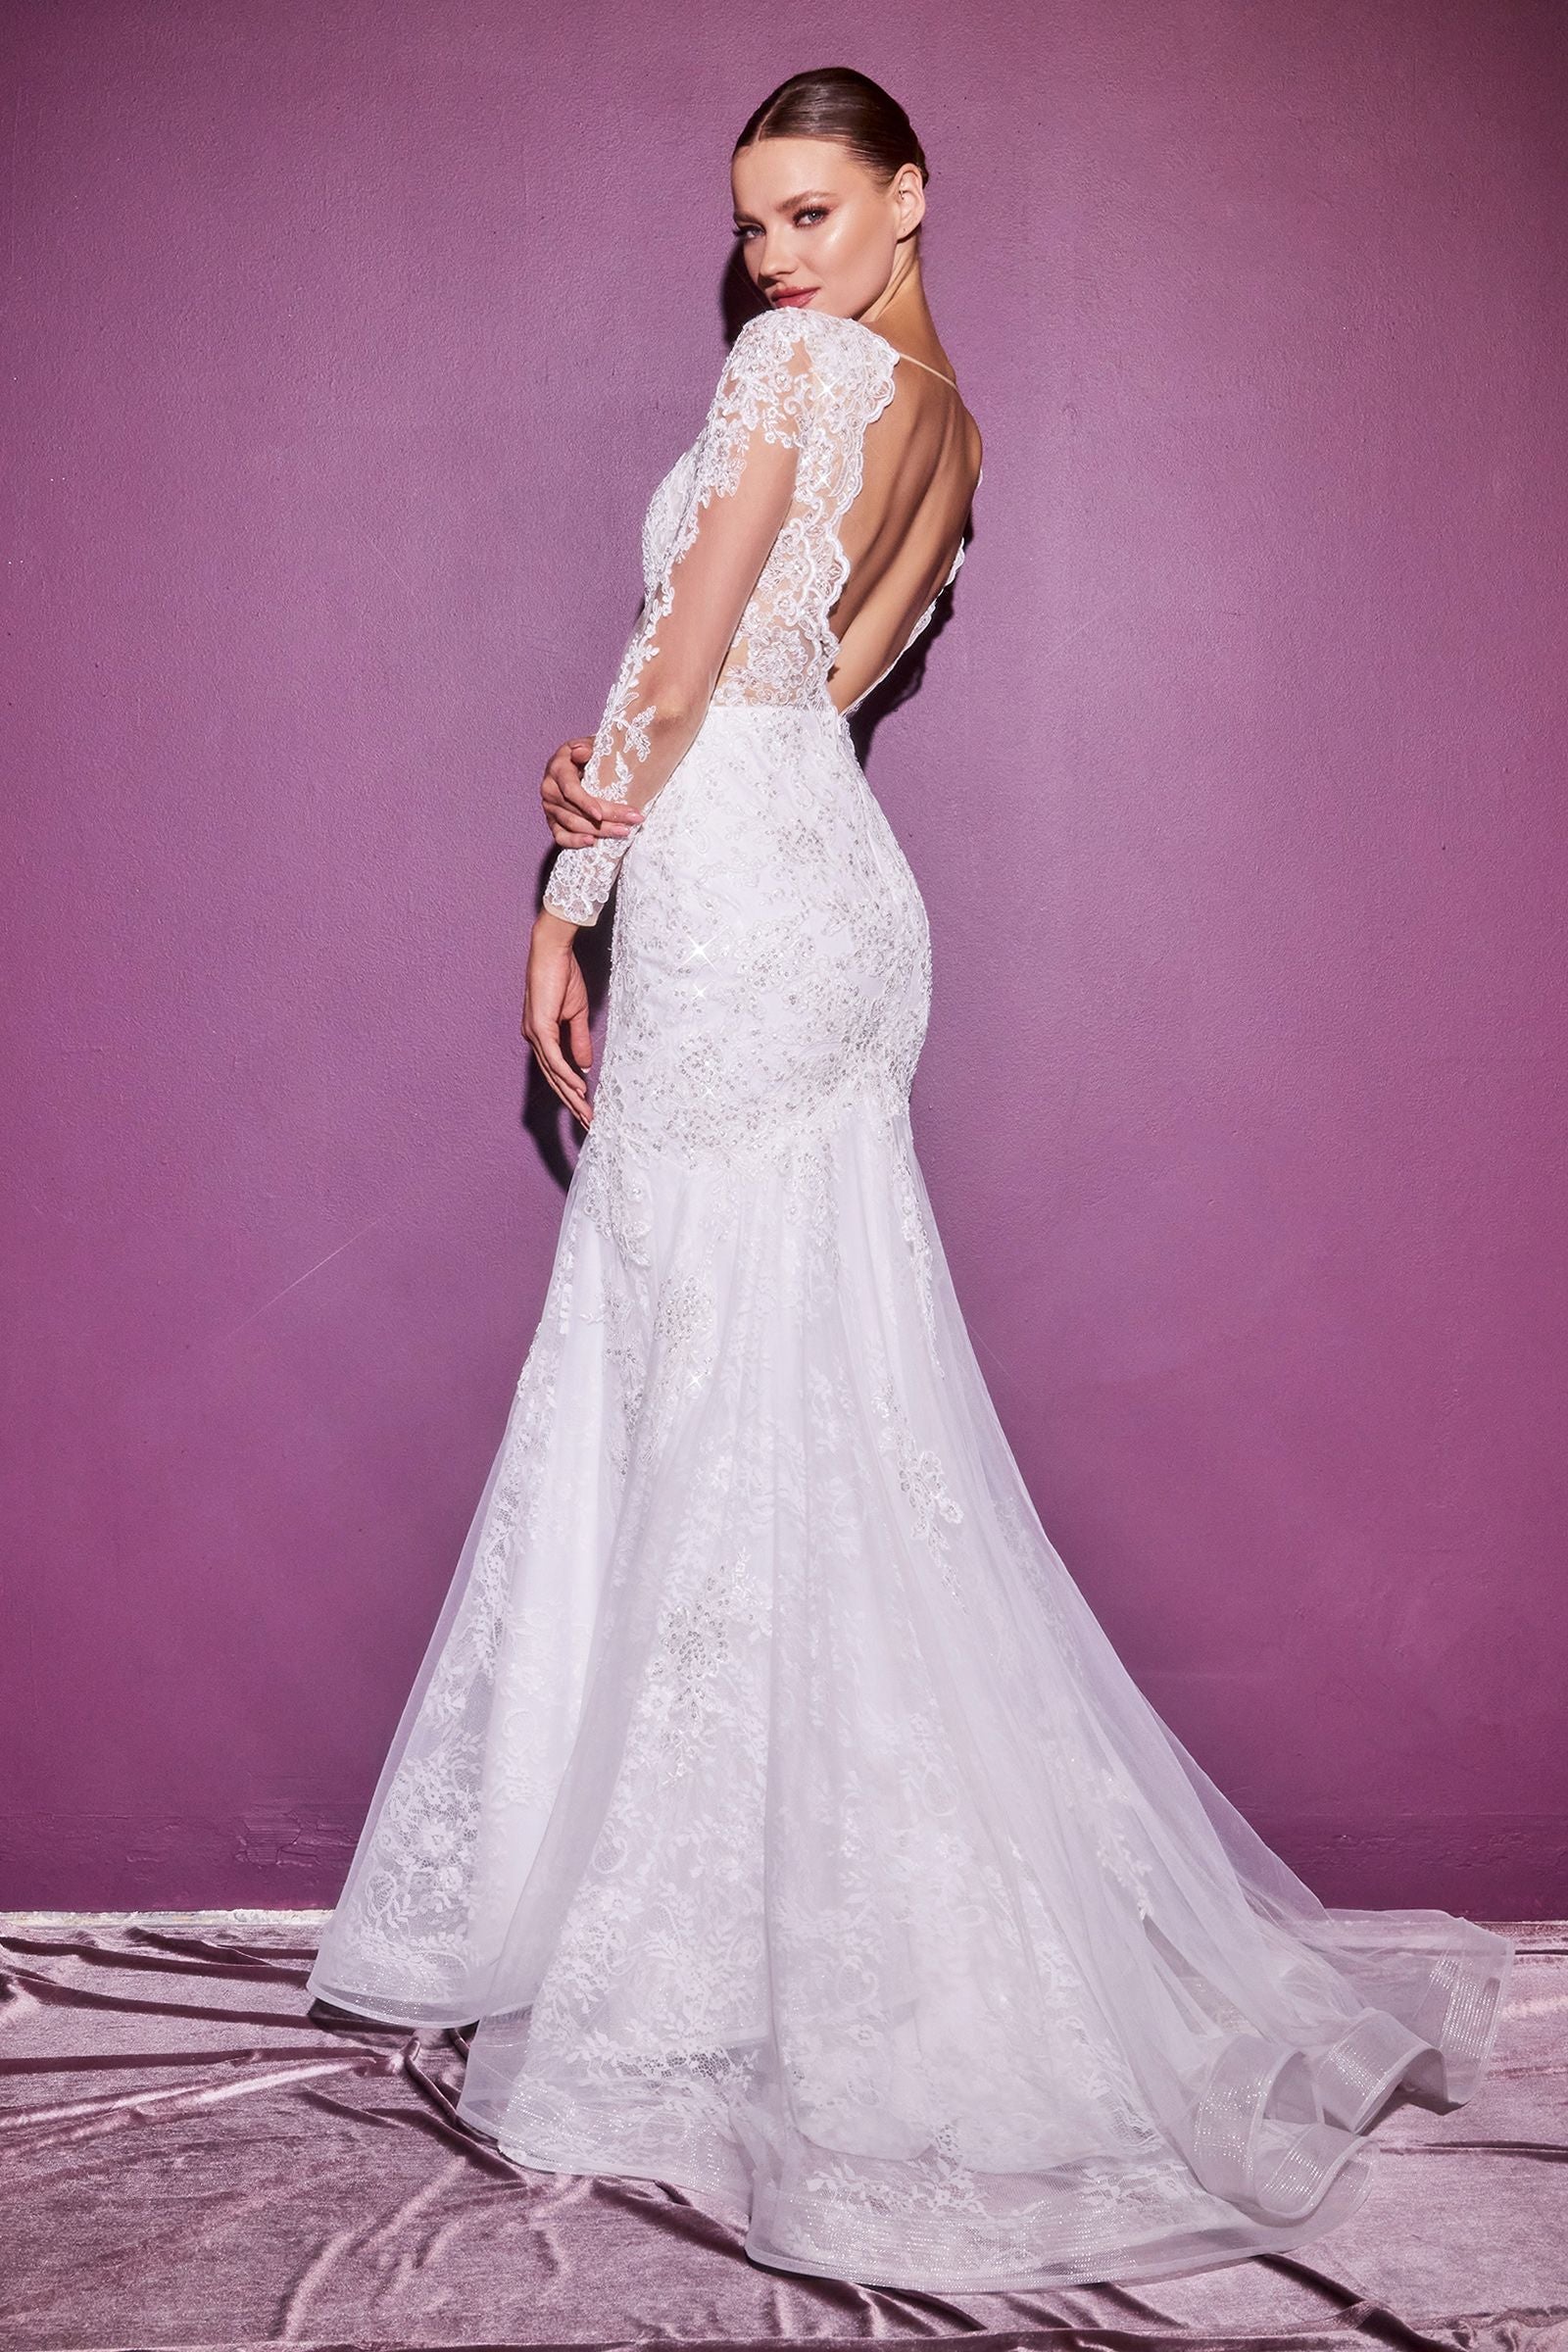 The Nia lace long sleeve bridal gown